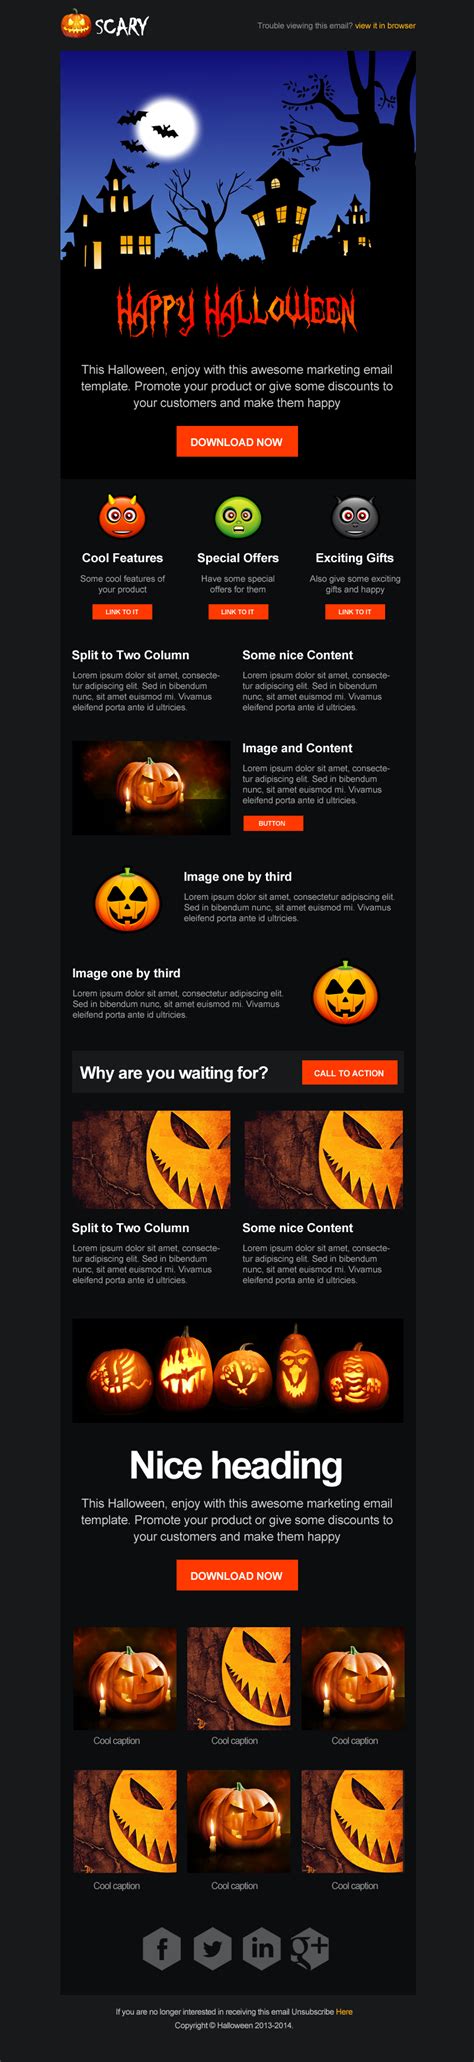 Scary Halloween Email Campaign Template By Surjithctly Themeforest